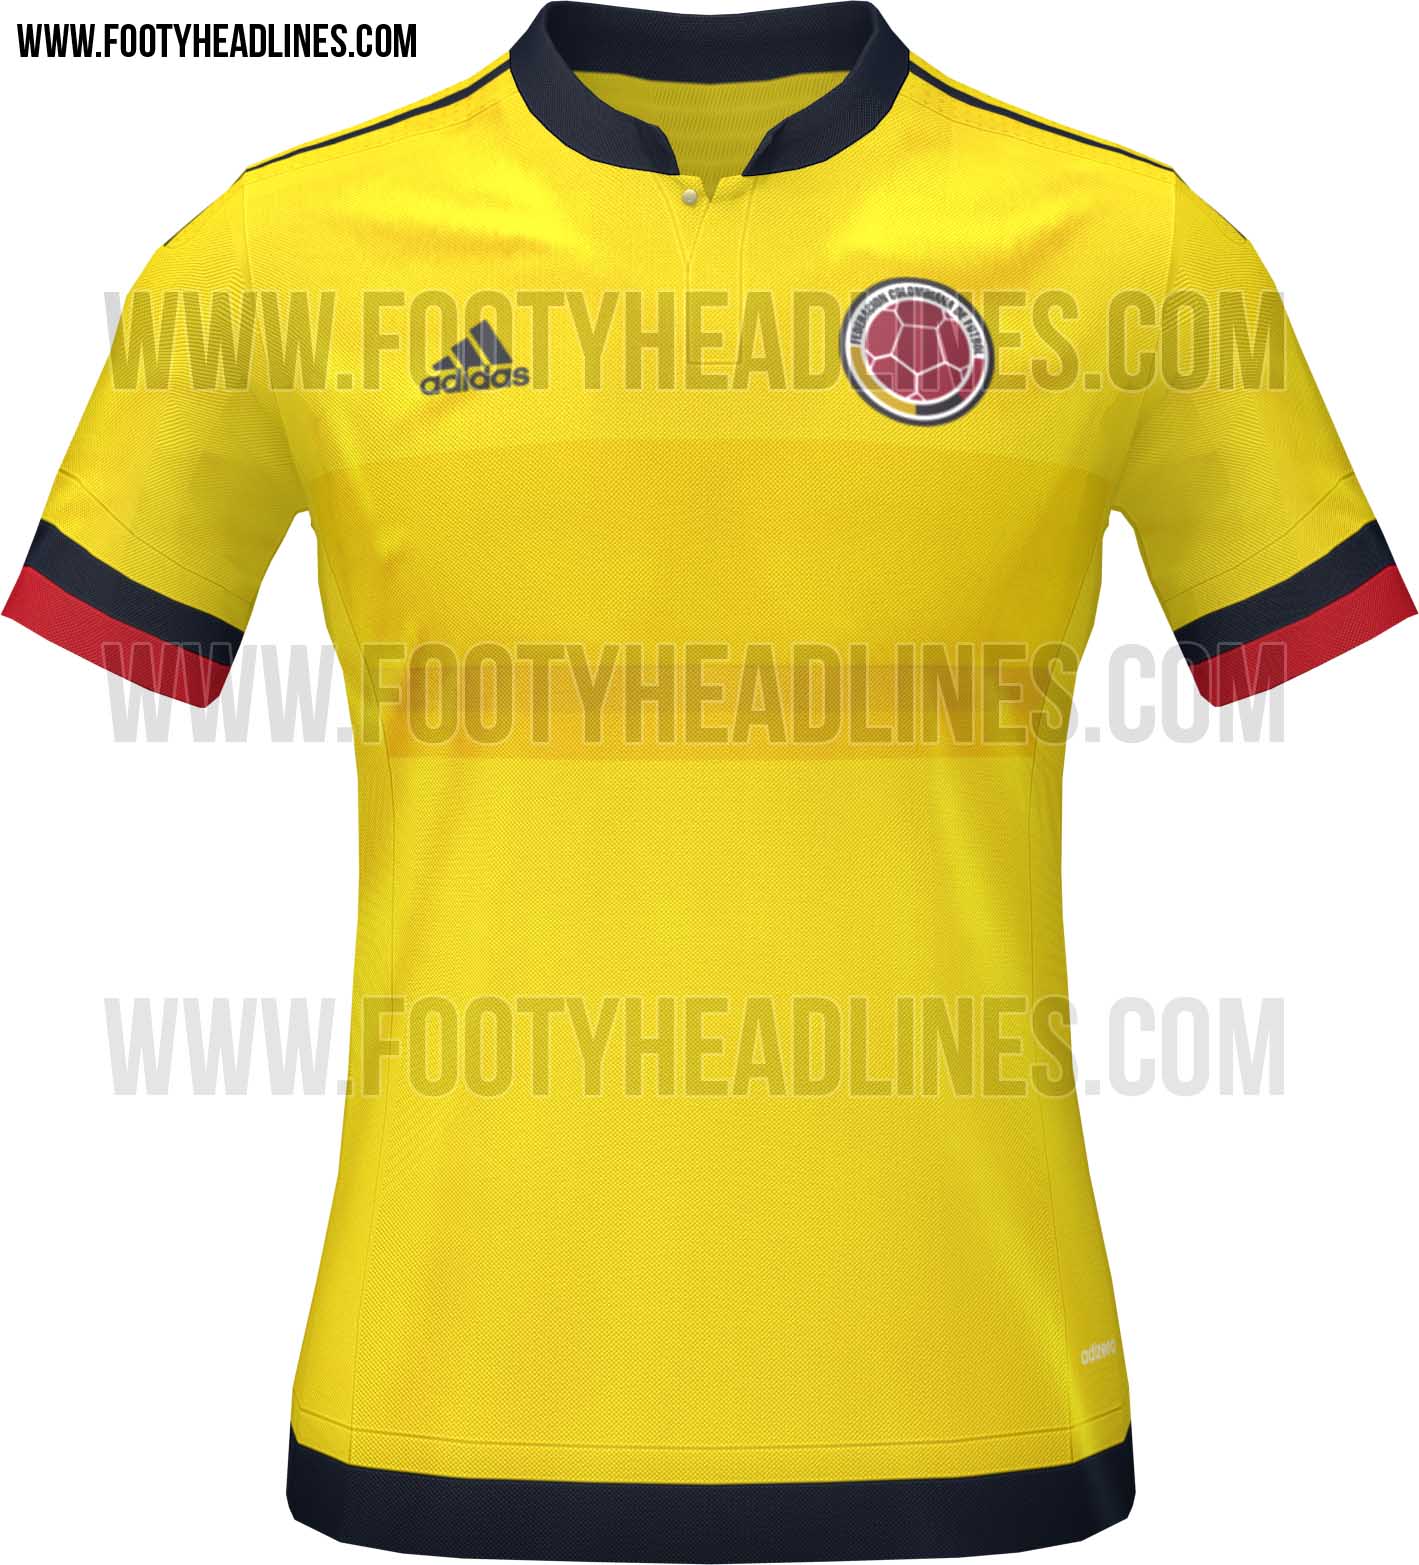 new colombia jersey